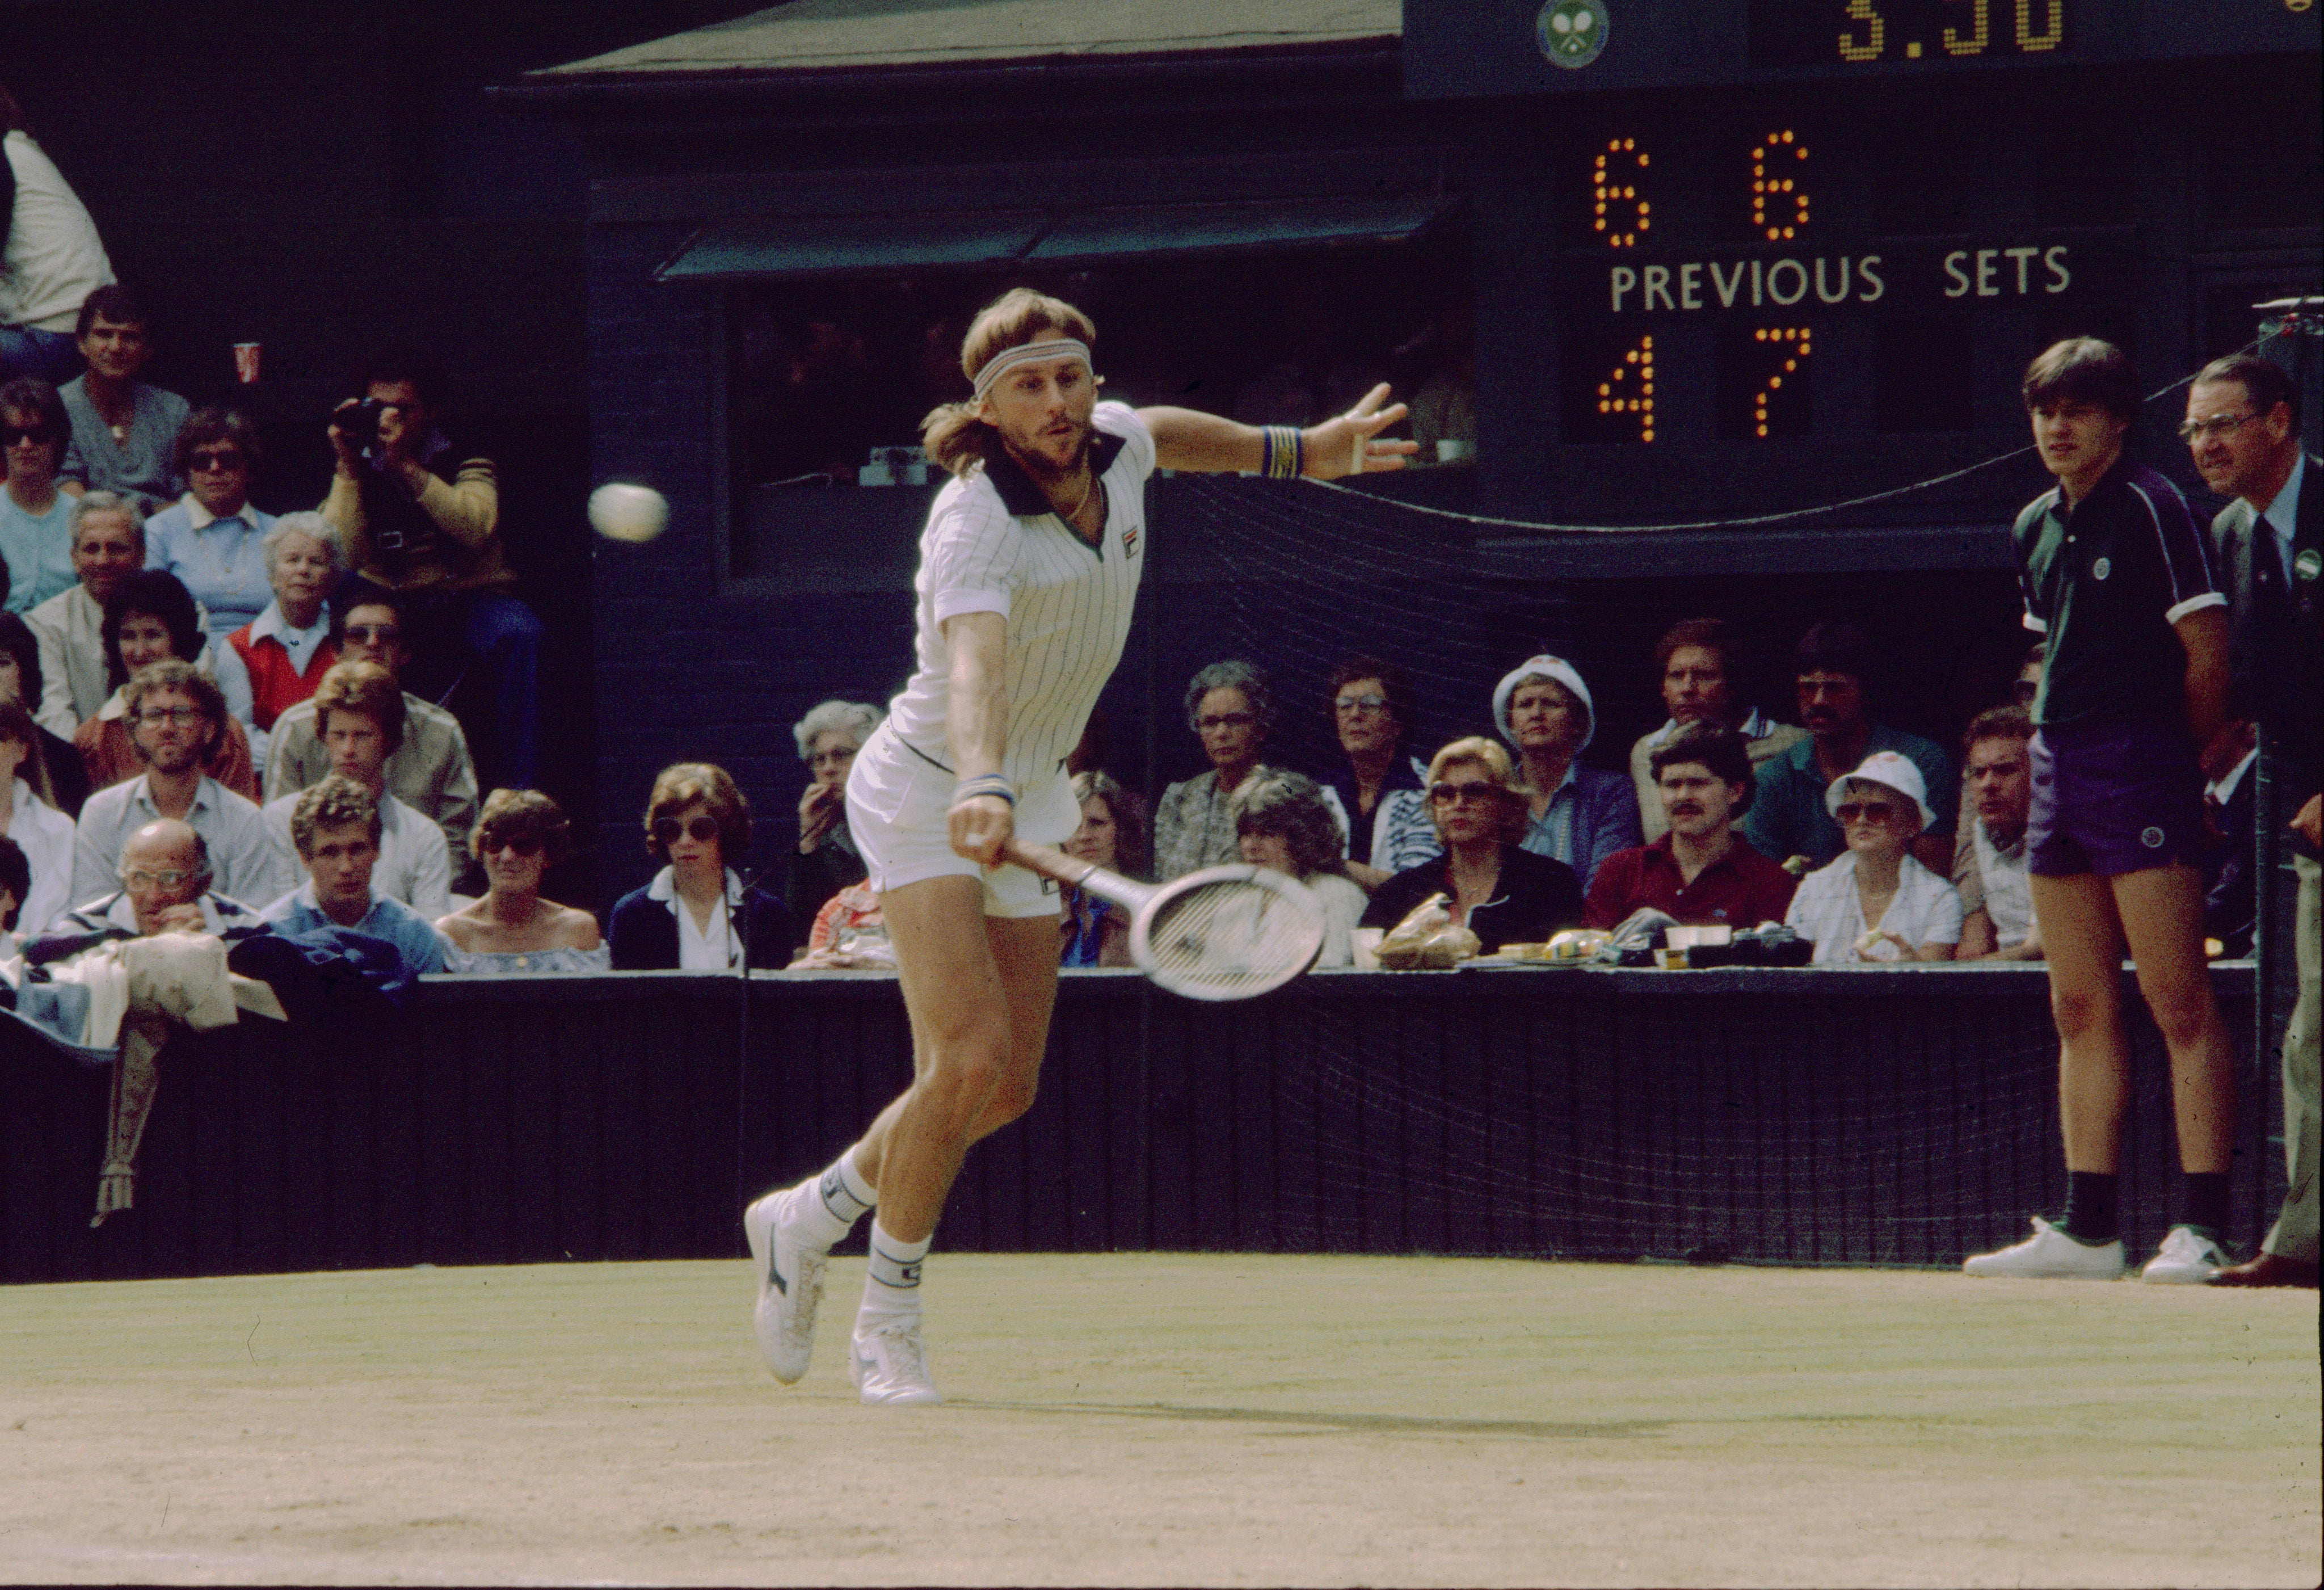 Wimbledon 1976: Bjorn Borg wins the maiden title without losing a set